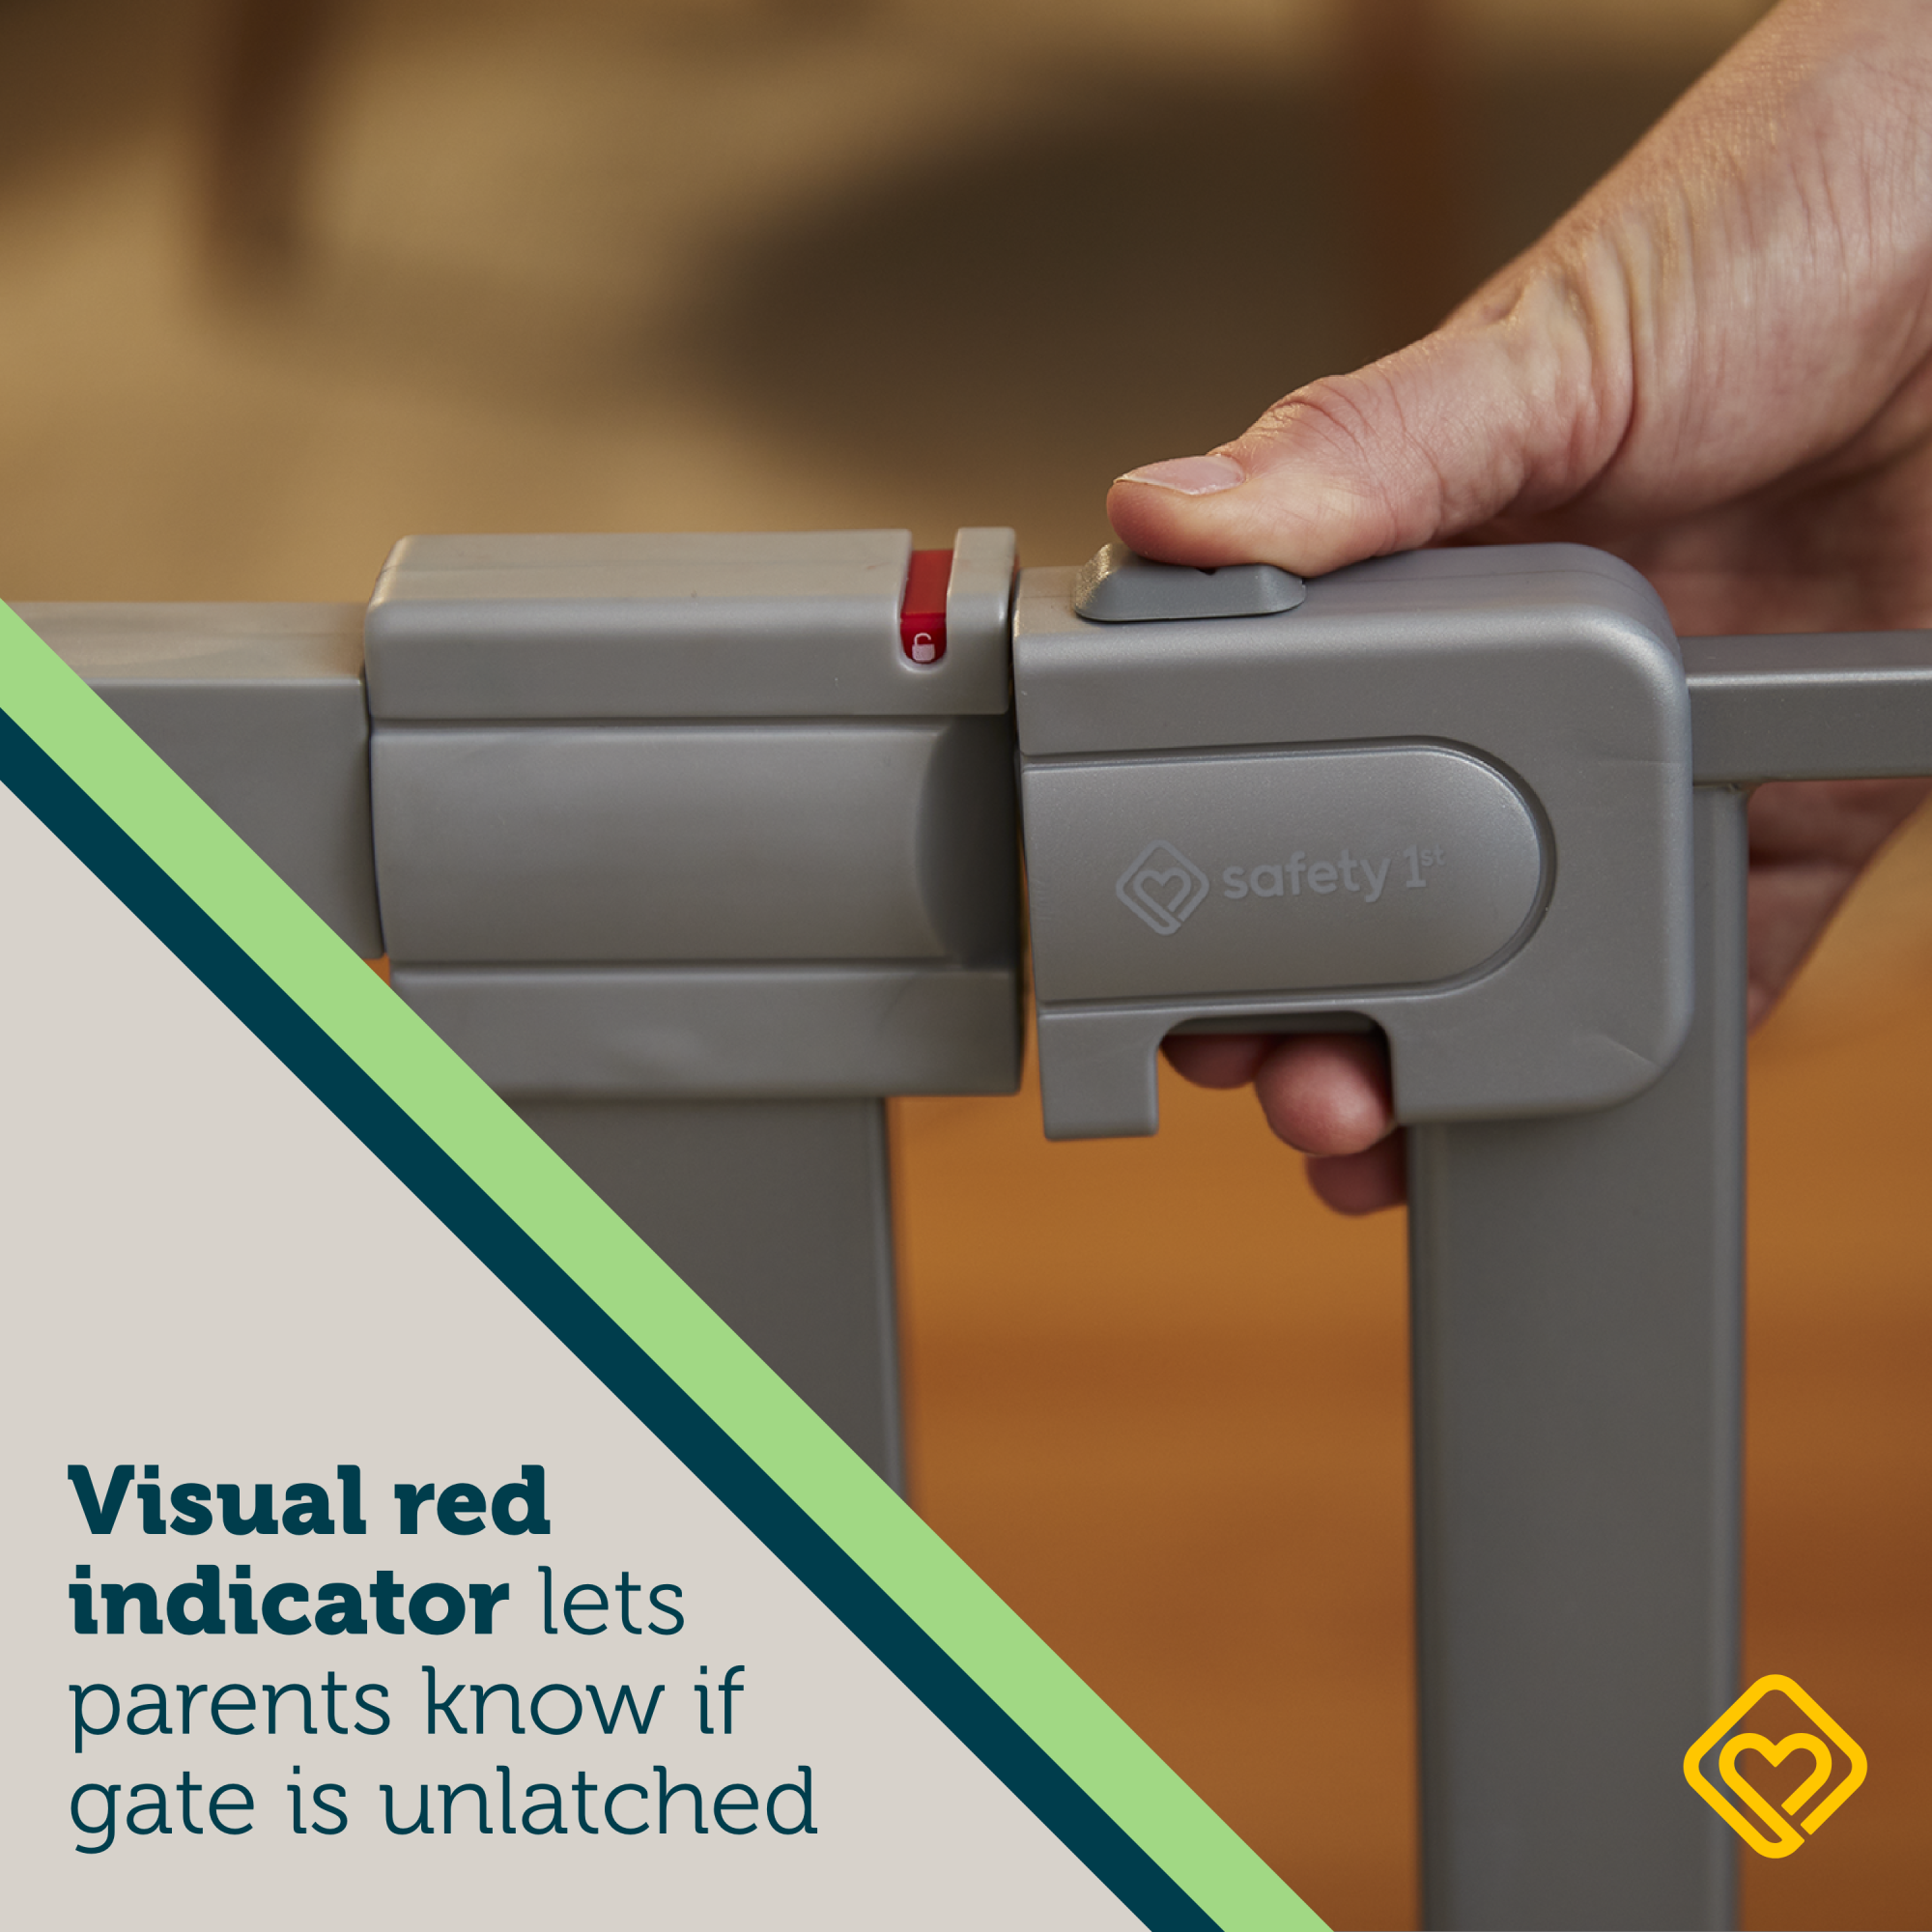 Modern Easy-Install Gate - visual red indicator lets parents know if gate is unlatched